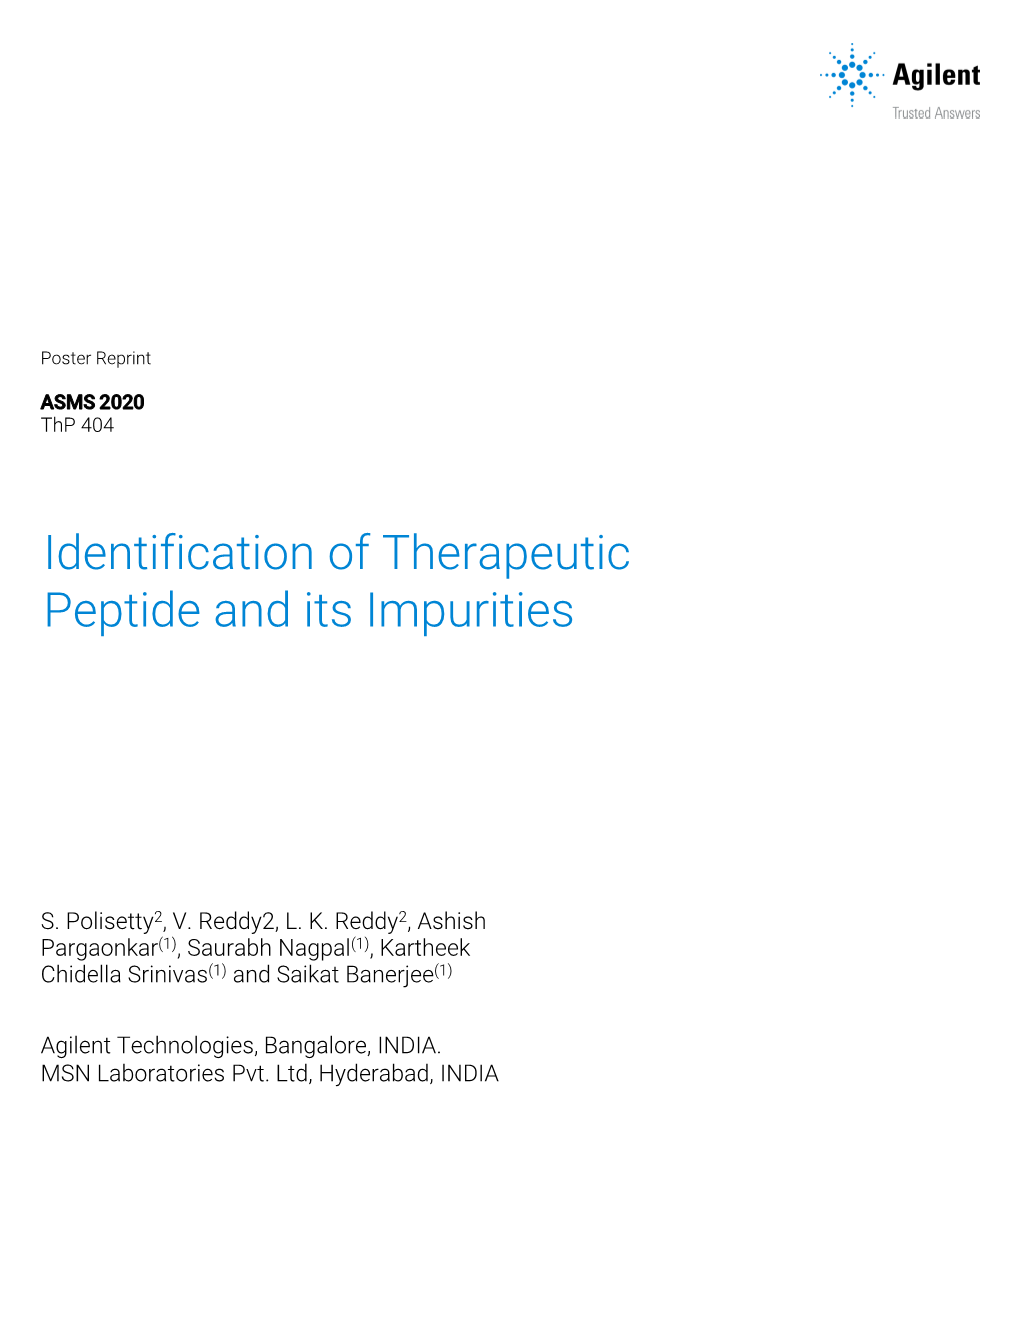 Identification of Therapeutic Peptide and Its Impurities